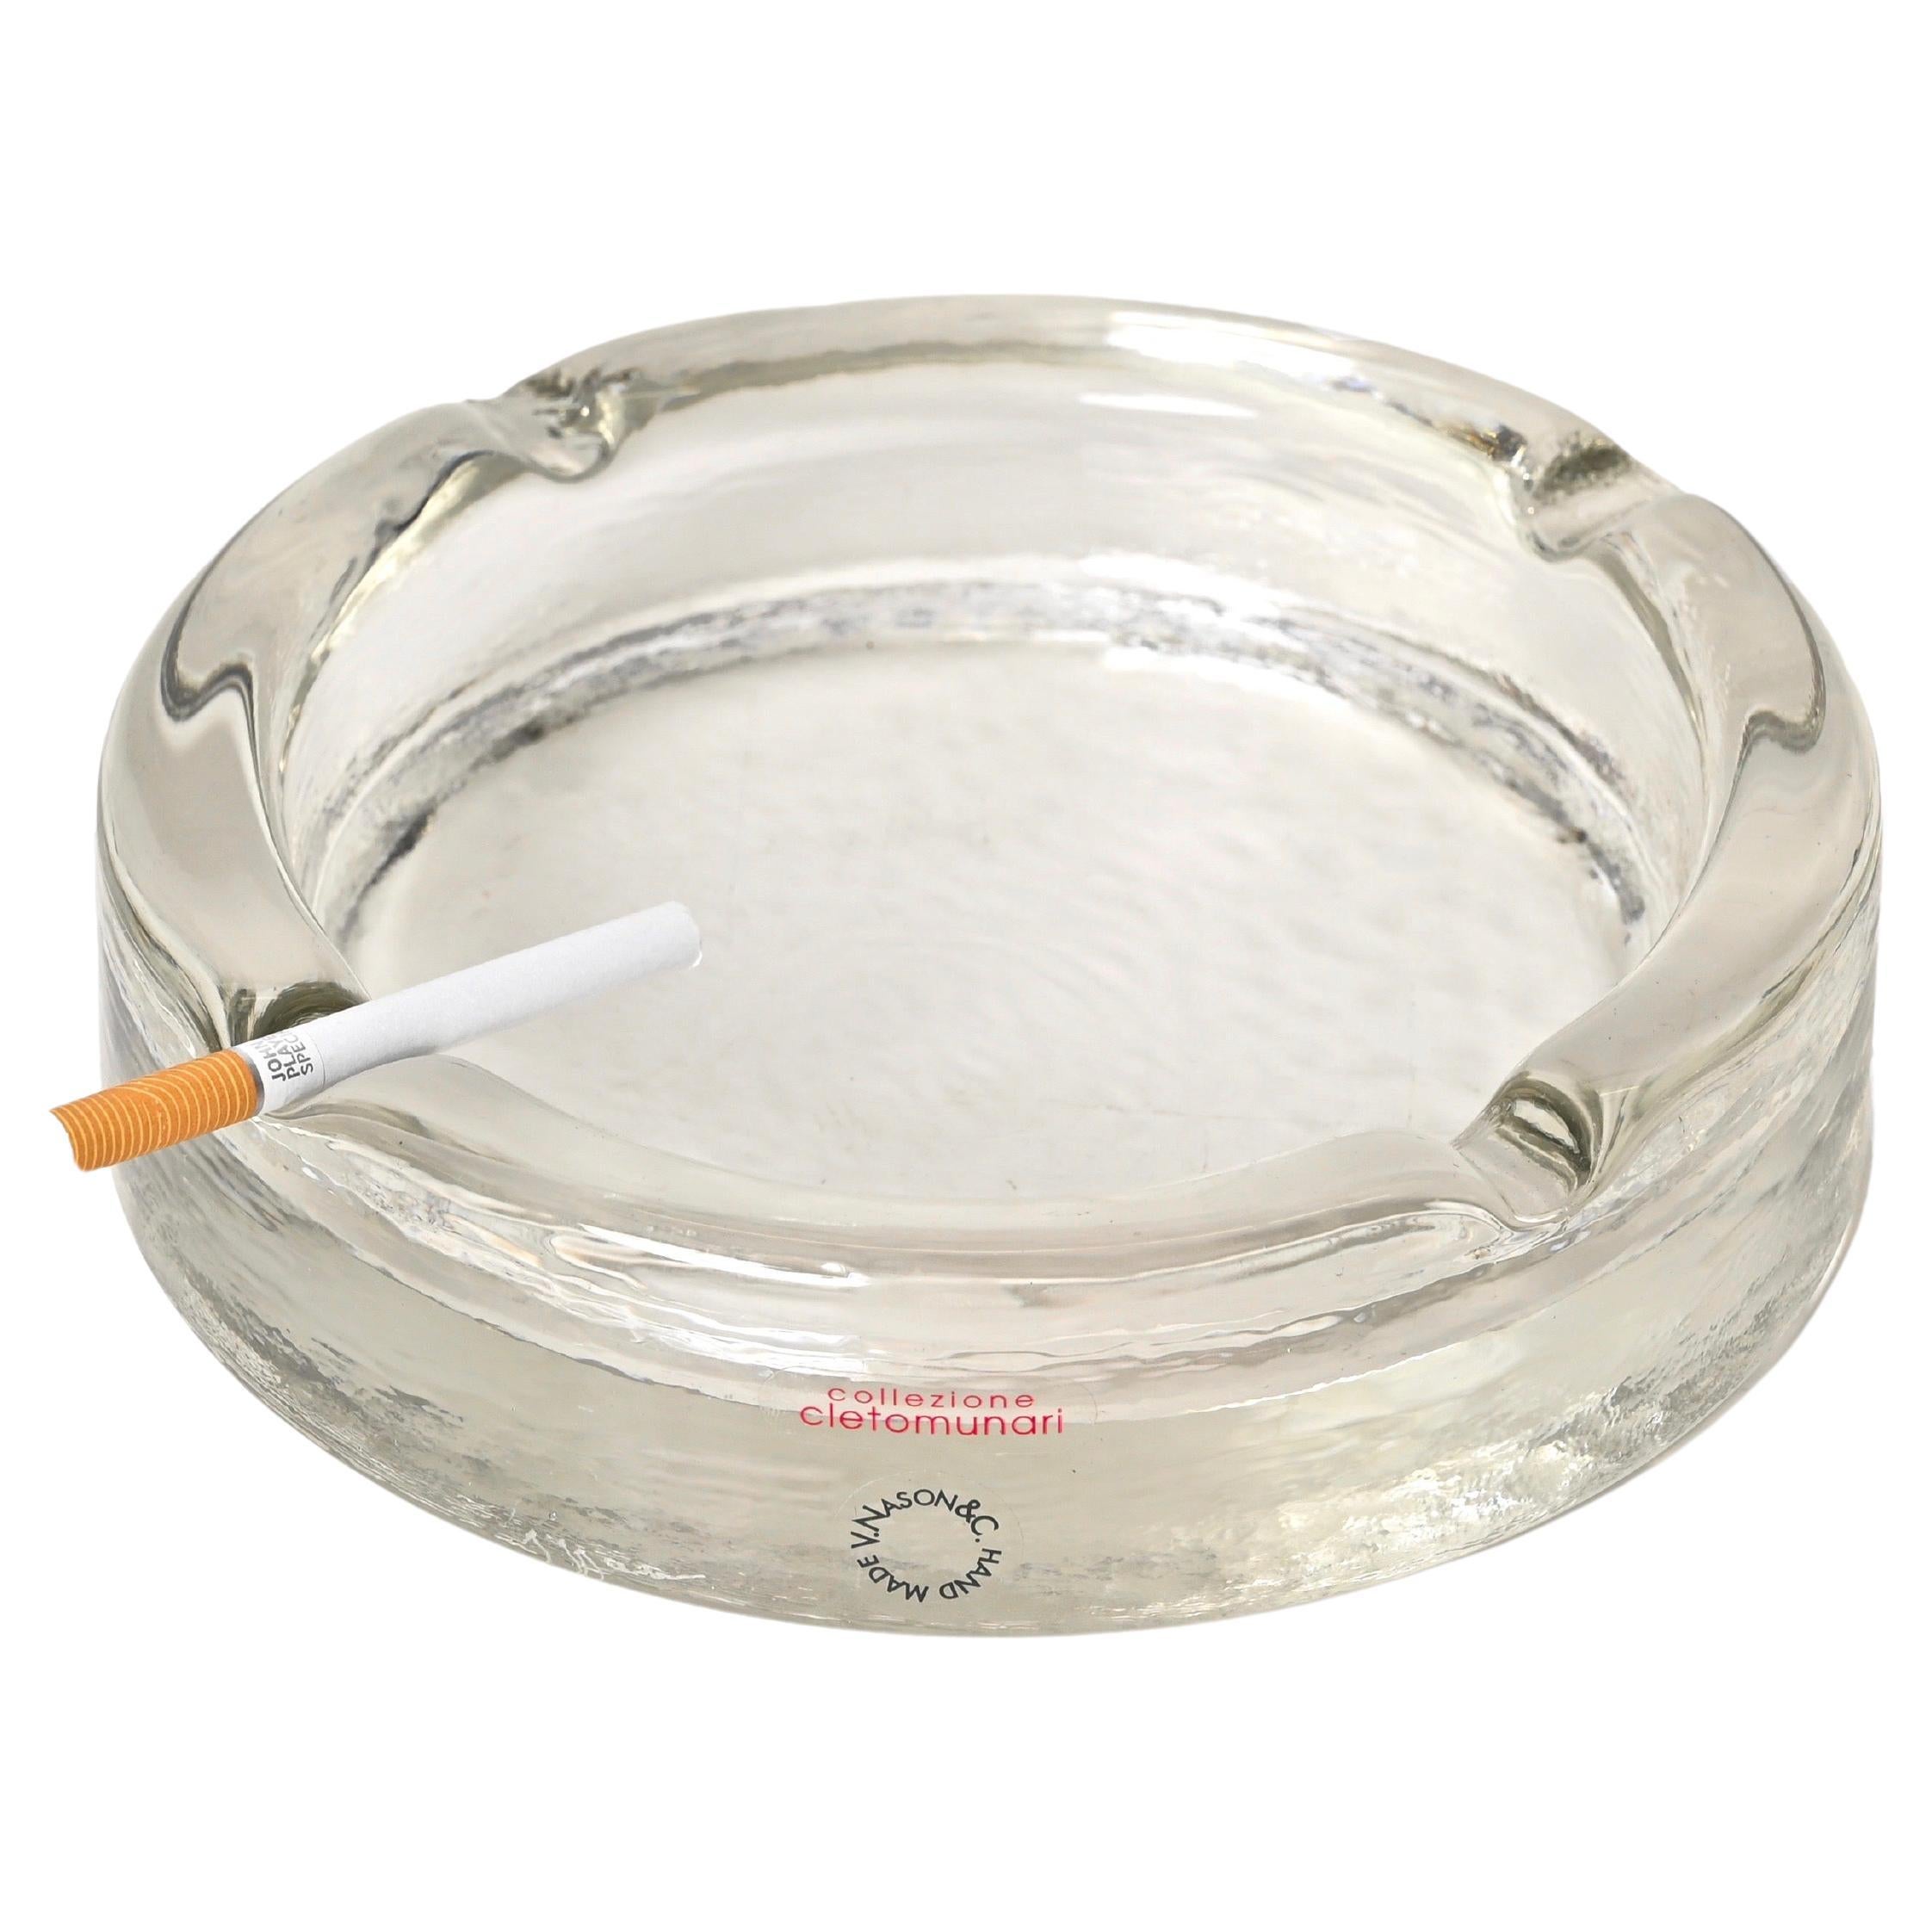 Nason & Co. Murano Ice Glass "Collection" Ashtray for Cleto Munari, Italy 1980s For Sale